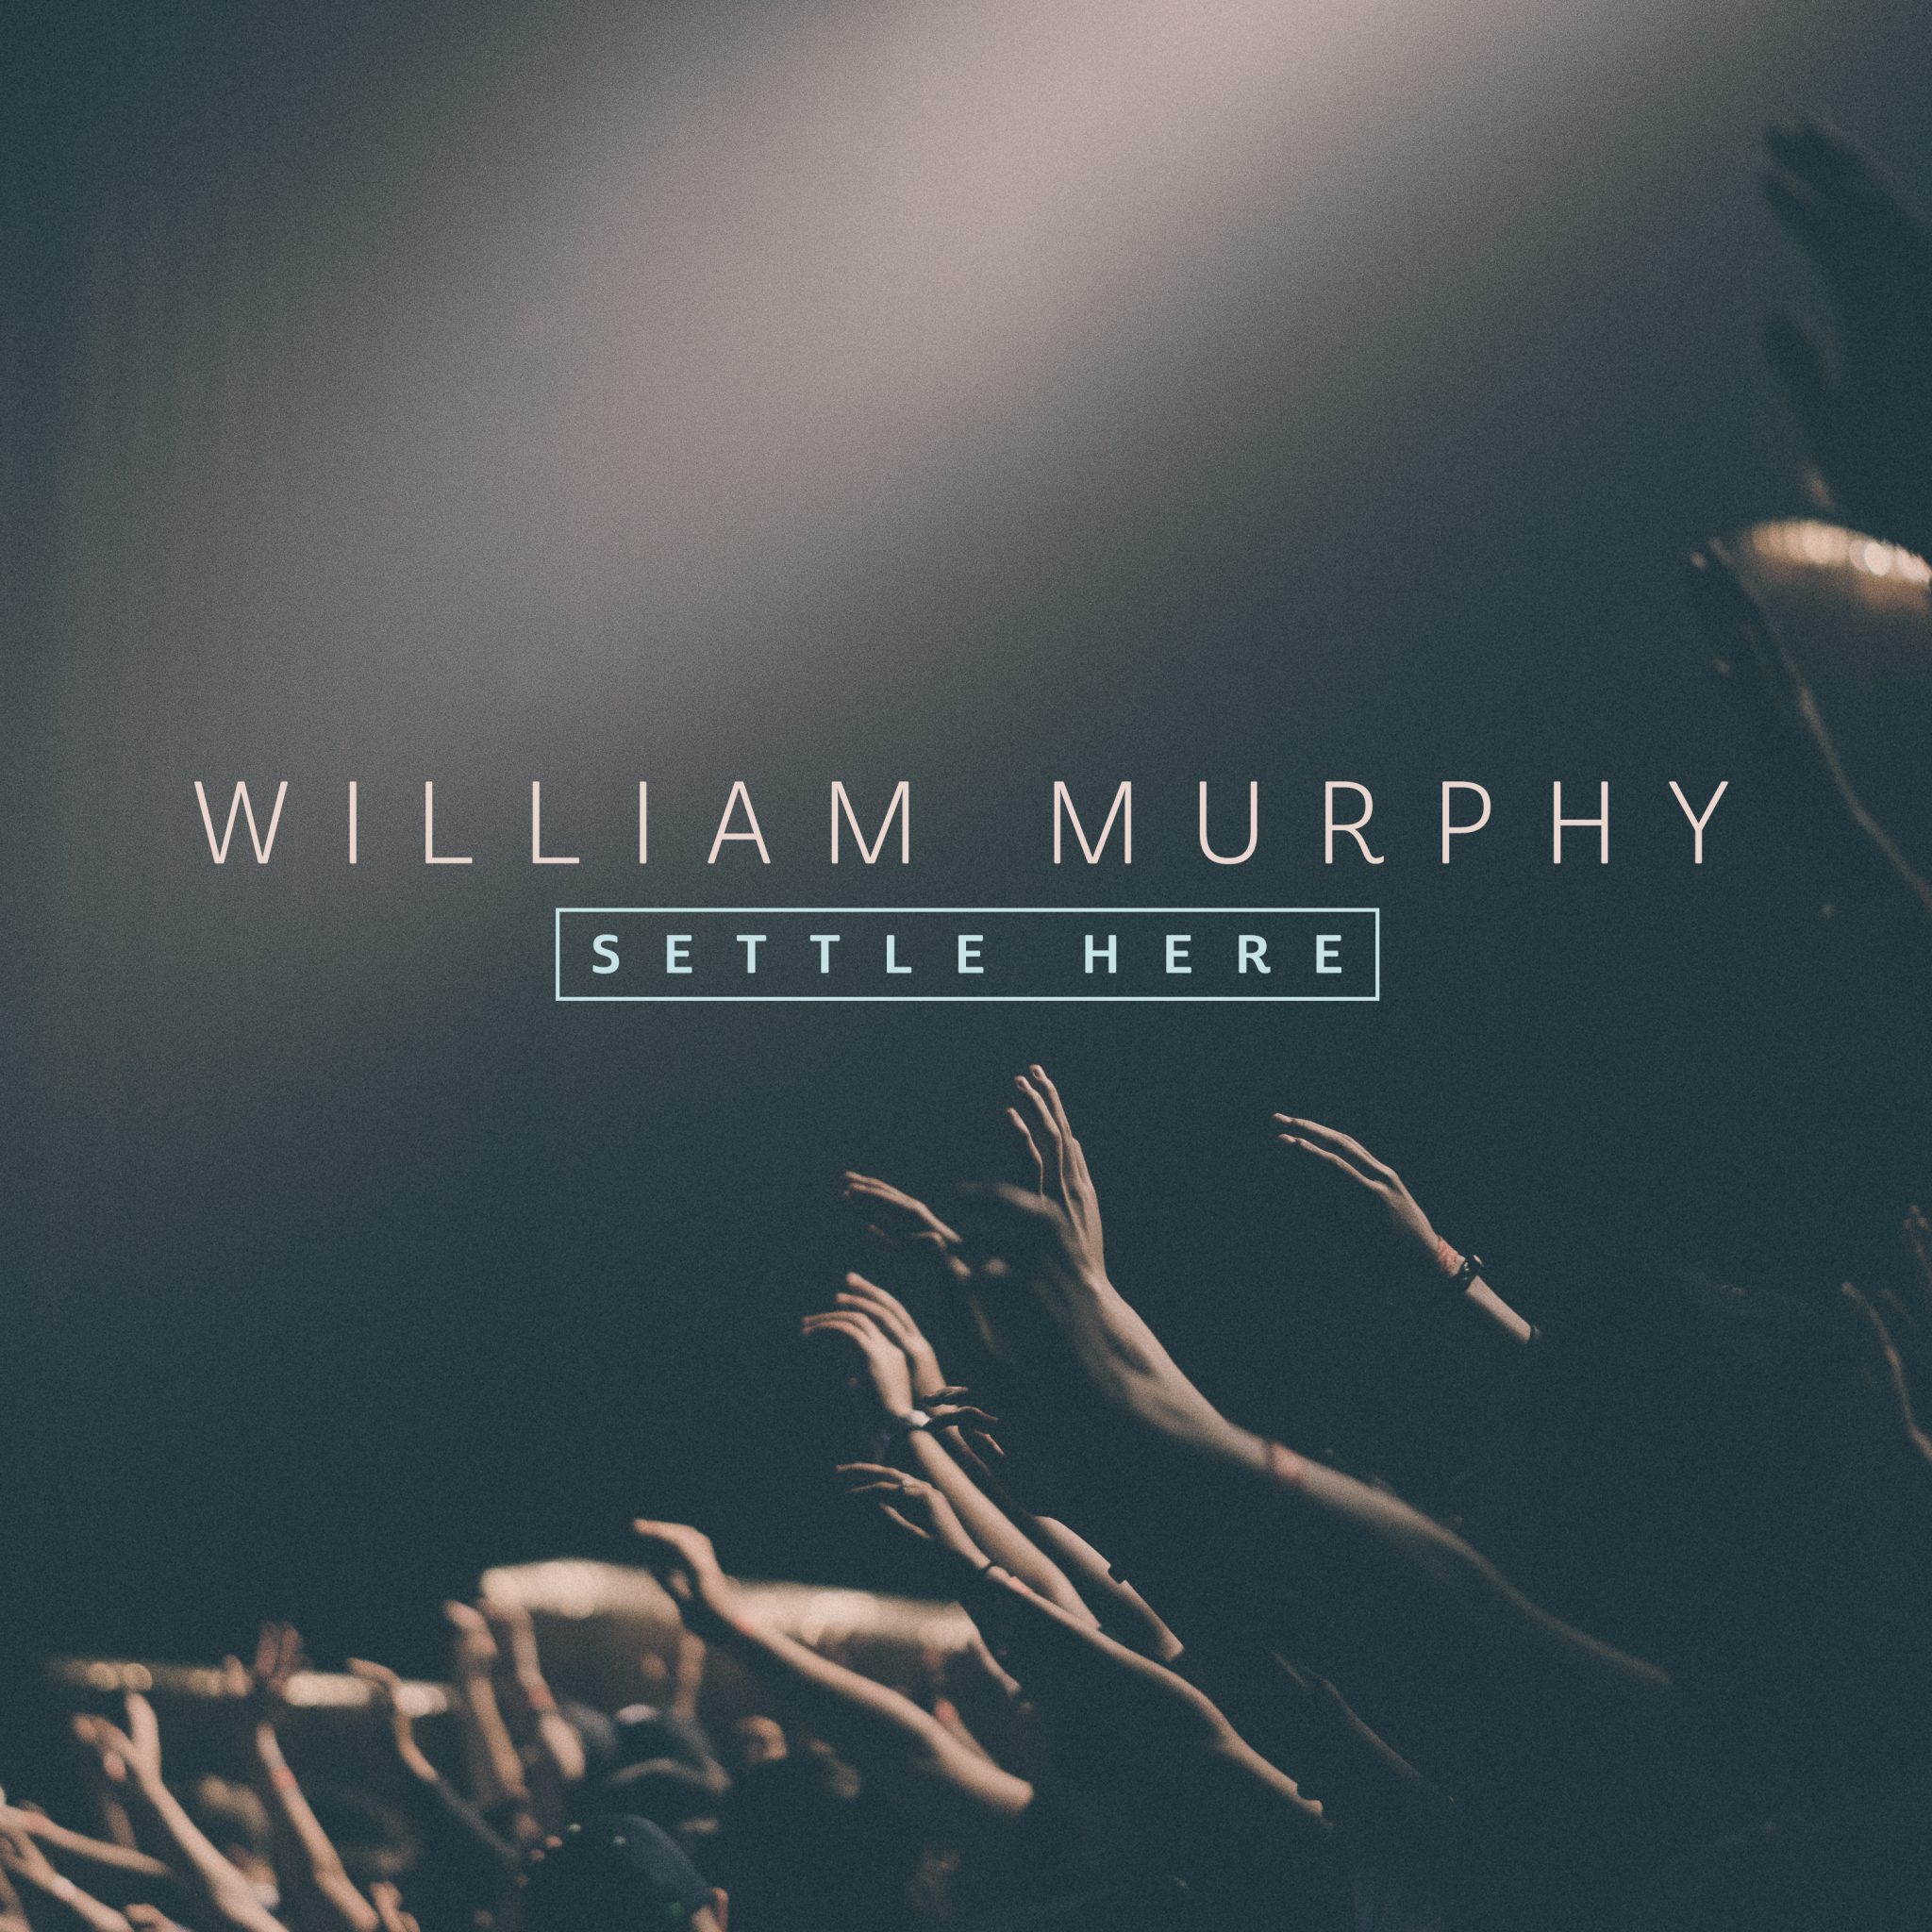 William Murphy, Releases His New Single “Settle Here”